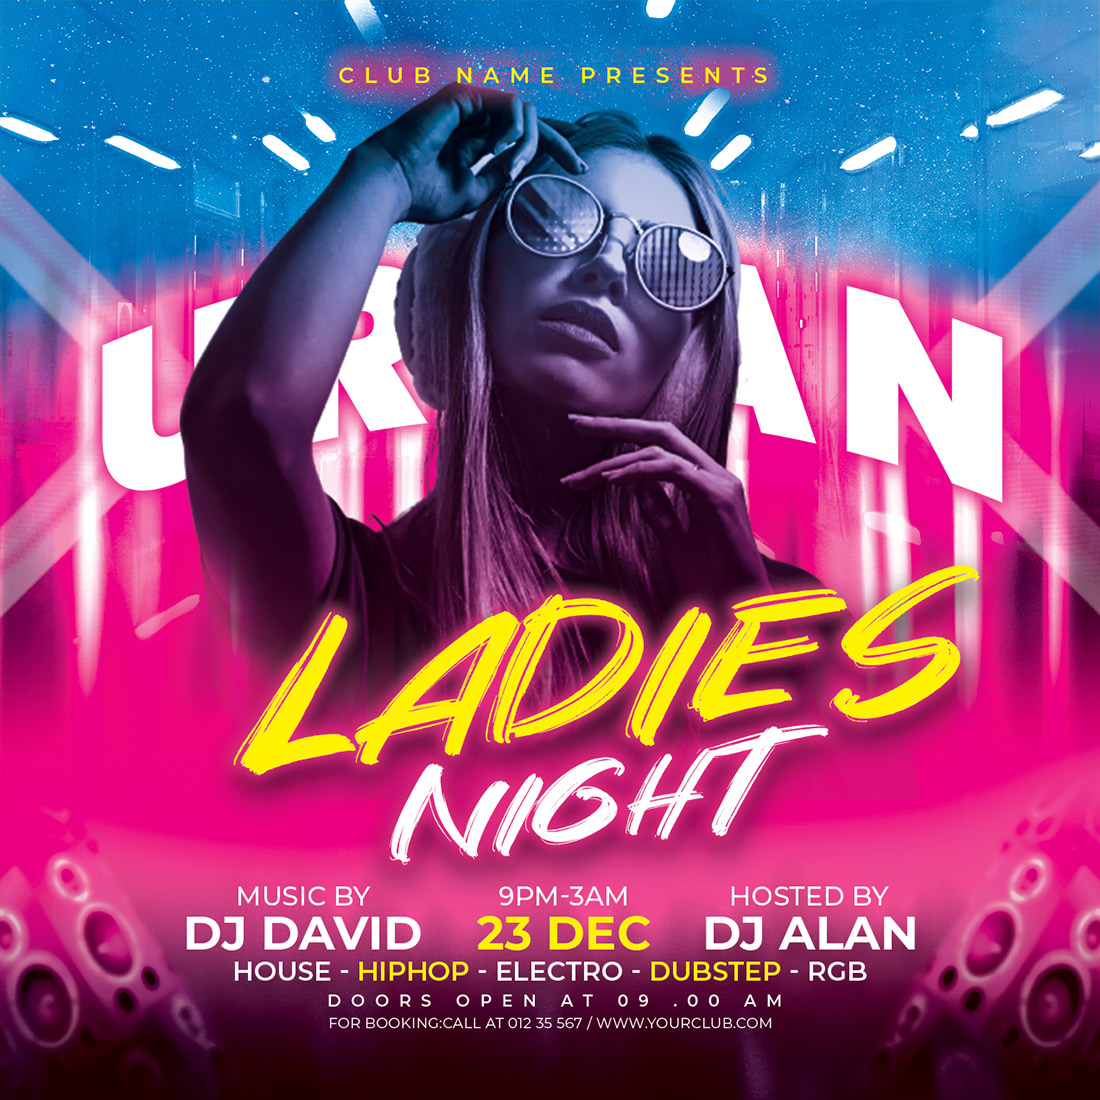 Ladies Night Party event Flyer preview image.